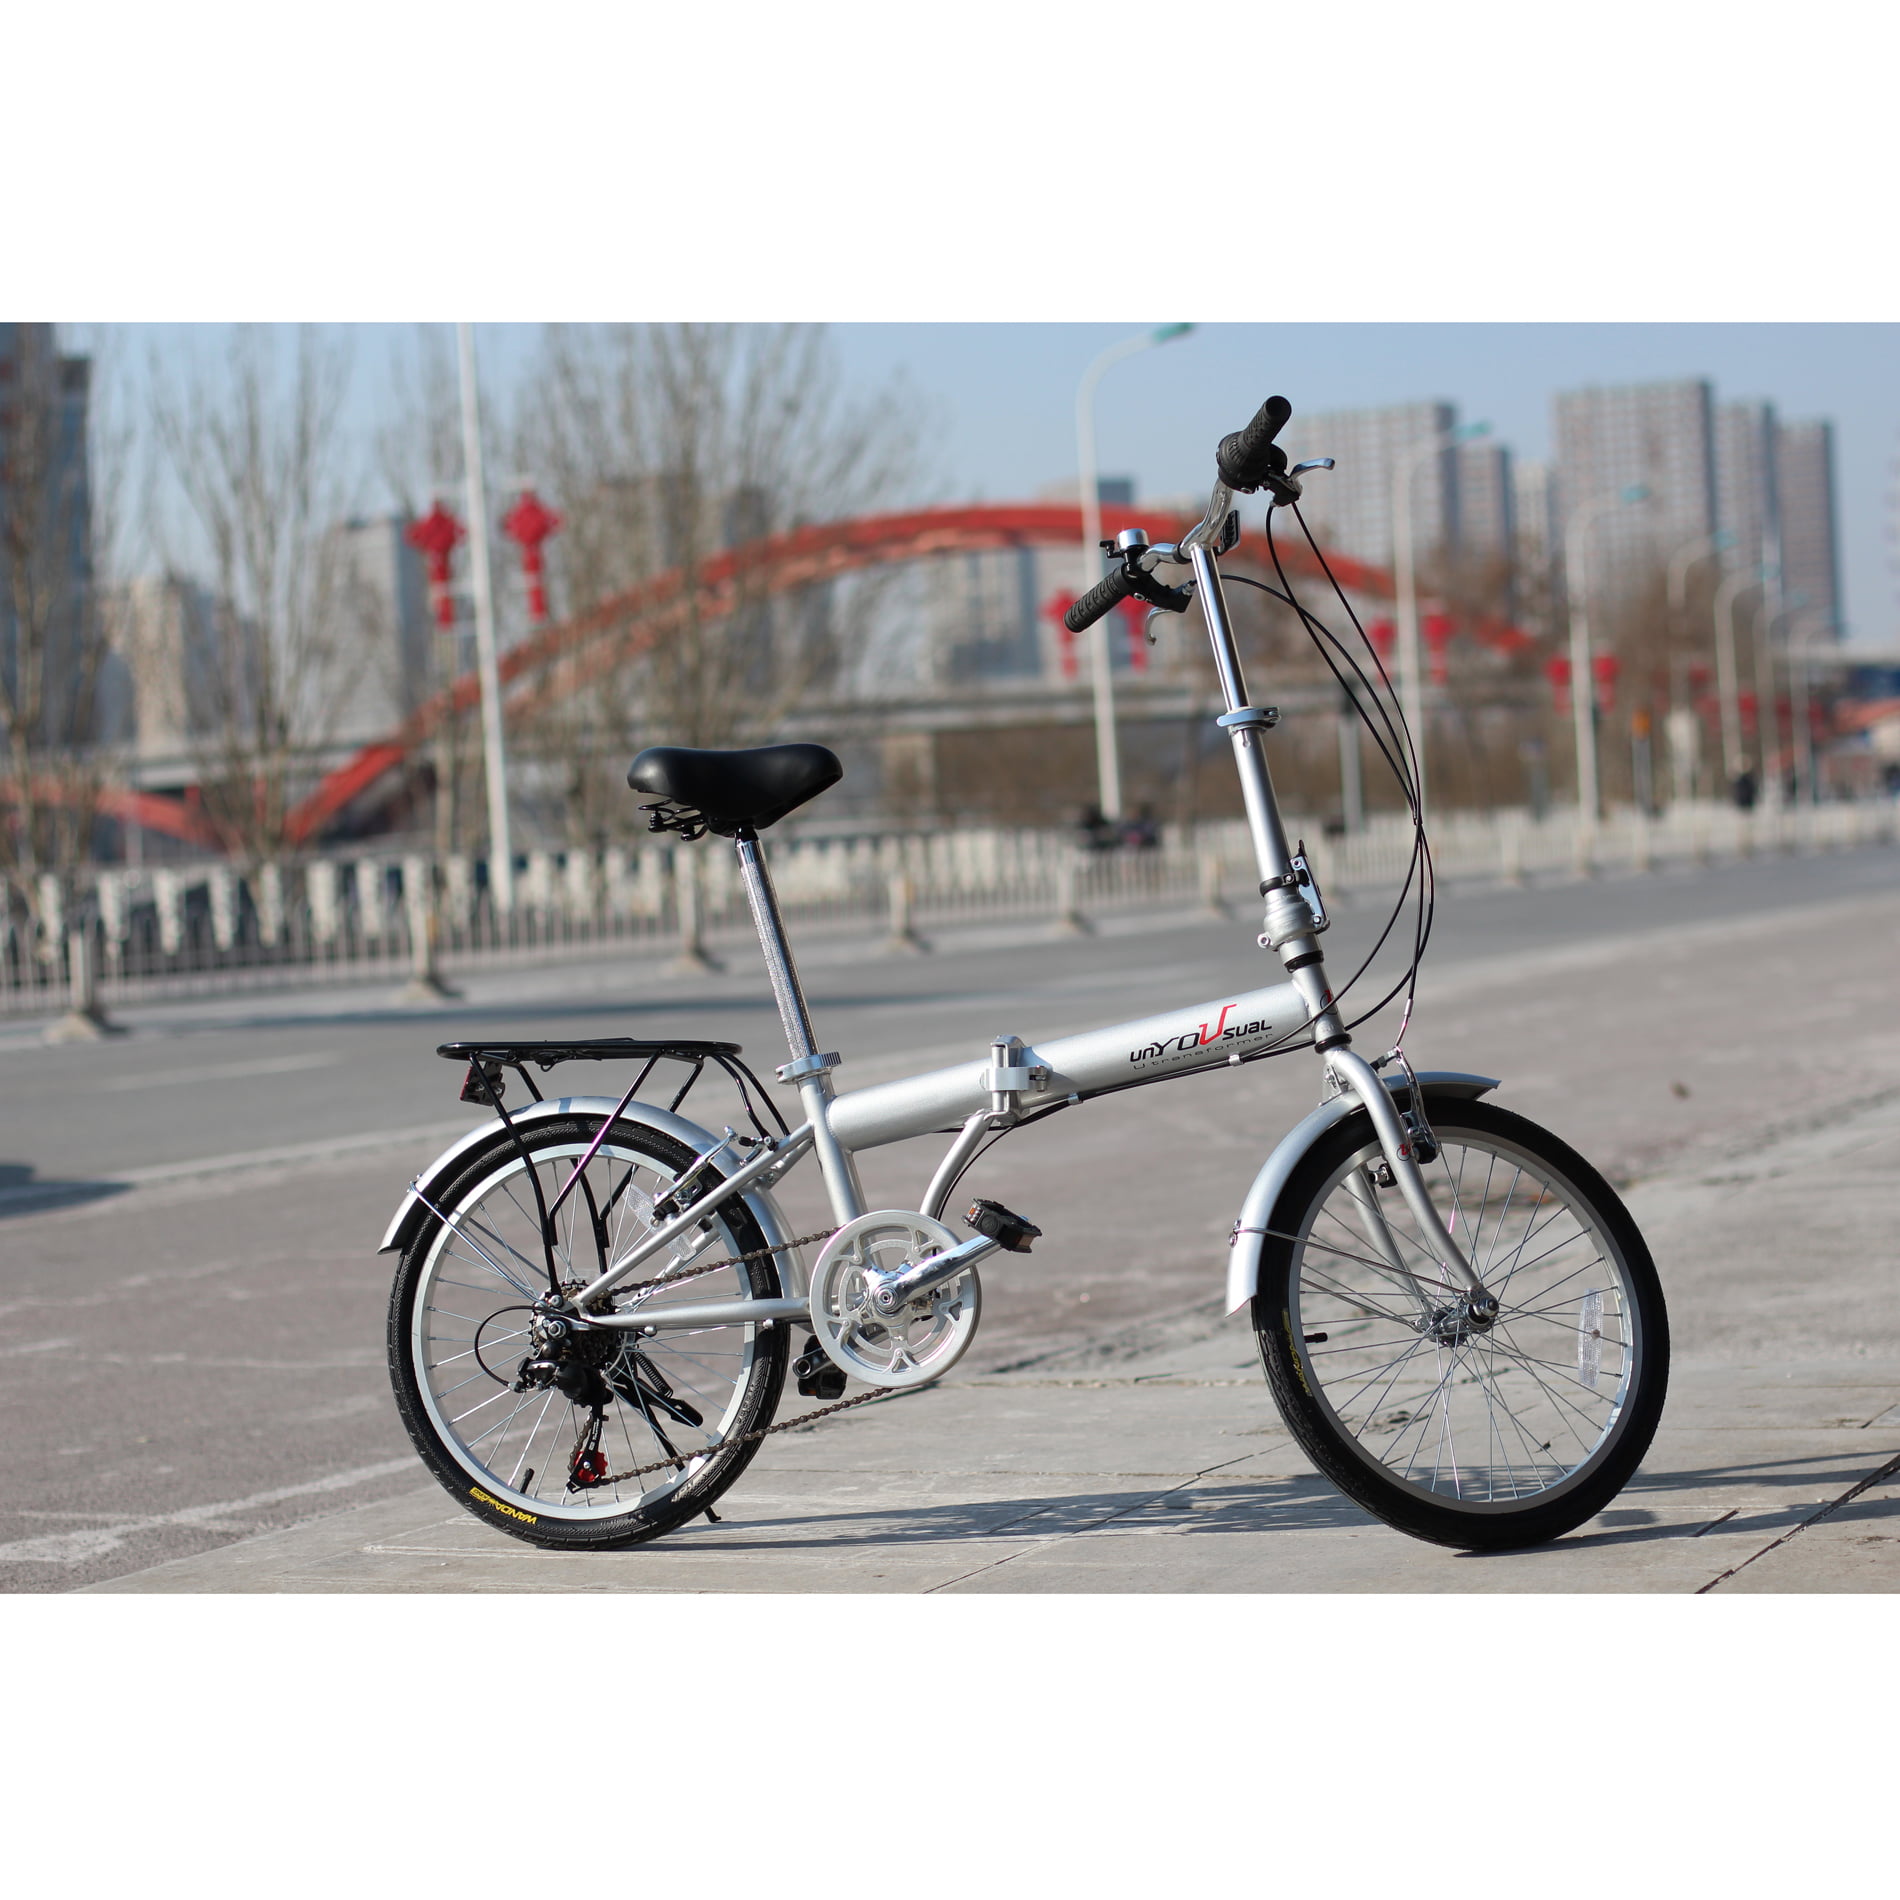 【US Stock】 UROSA Leisure Mini 20in Folding Bikes Lightweight Aluminum Road Urban Commuters Bicycle Tires High Tensile Steel Folding Frame 7 Speed ​​City Compact Bike